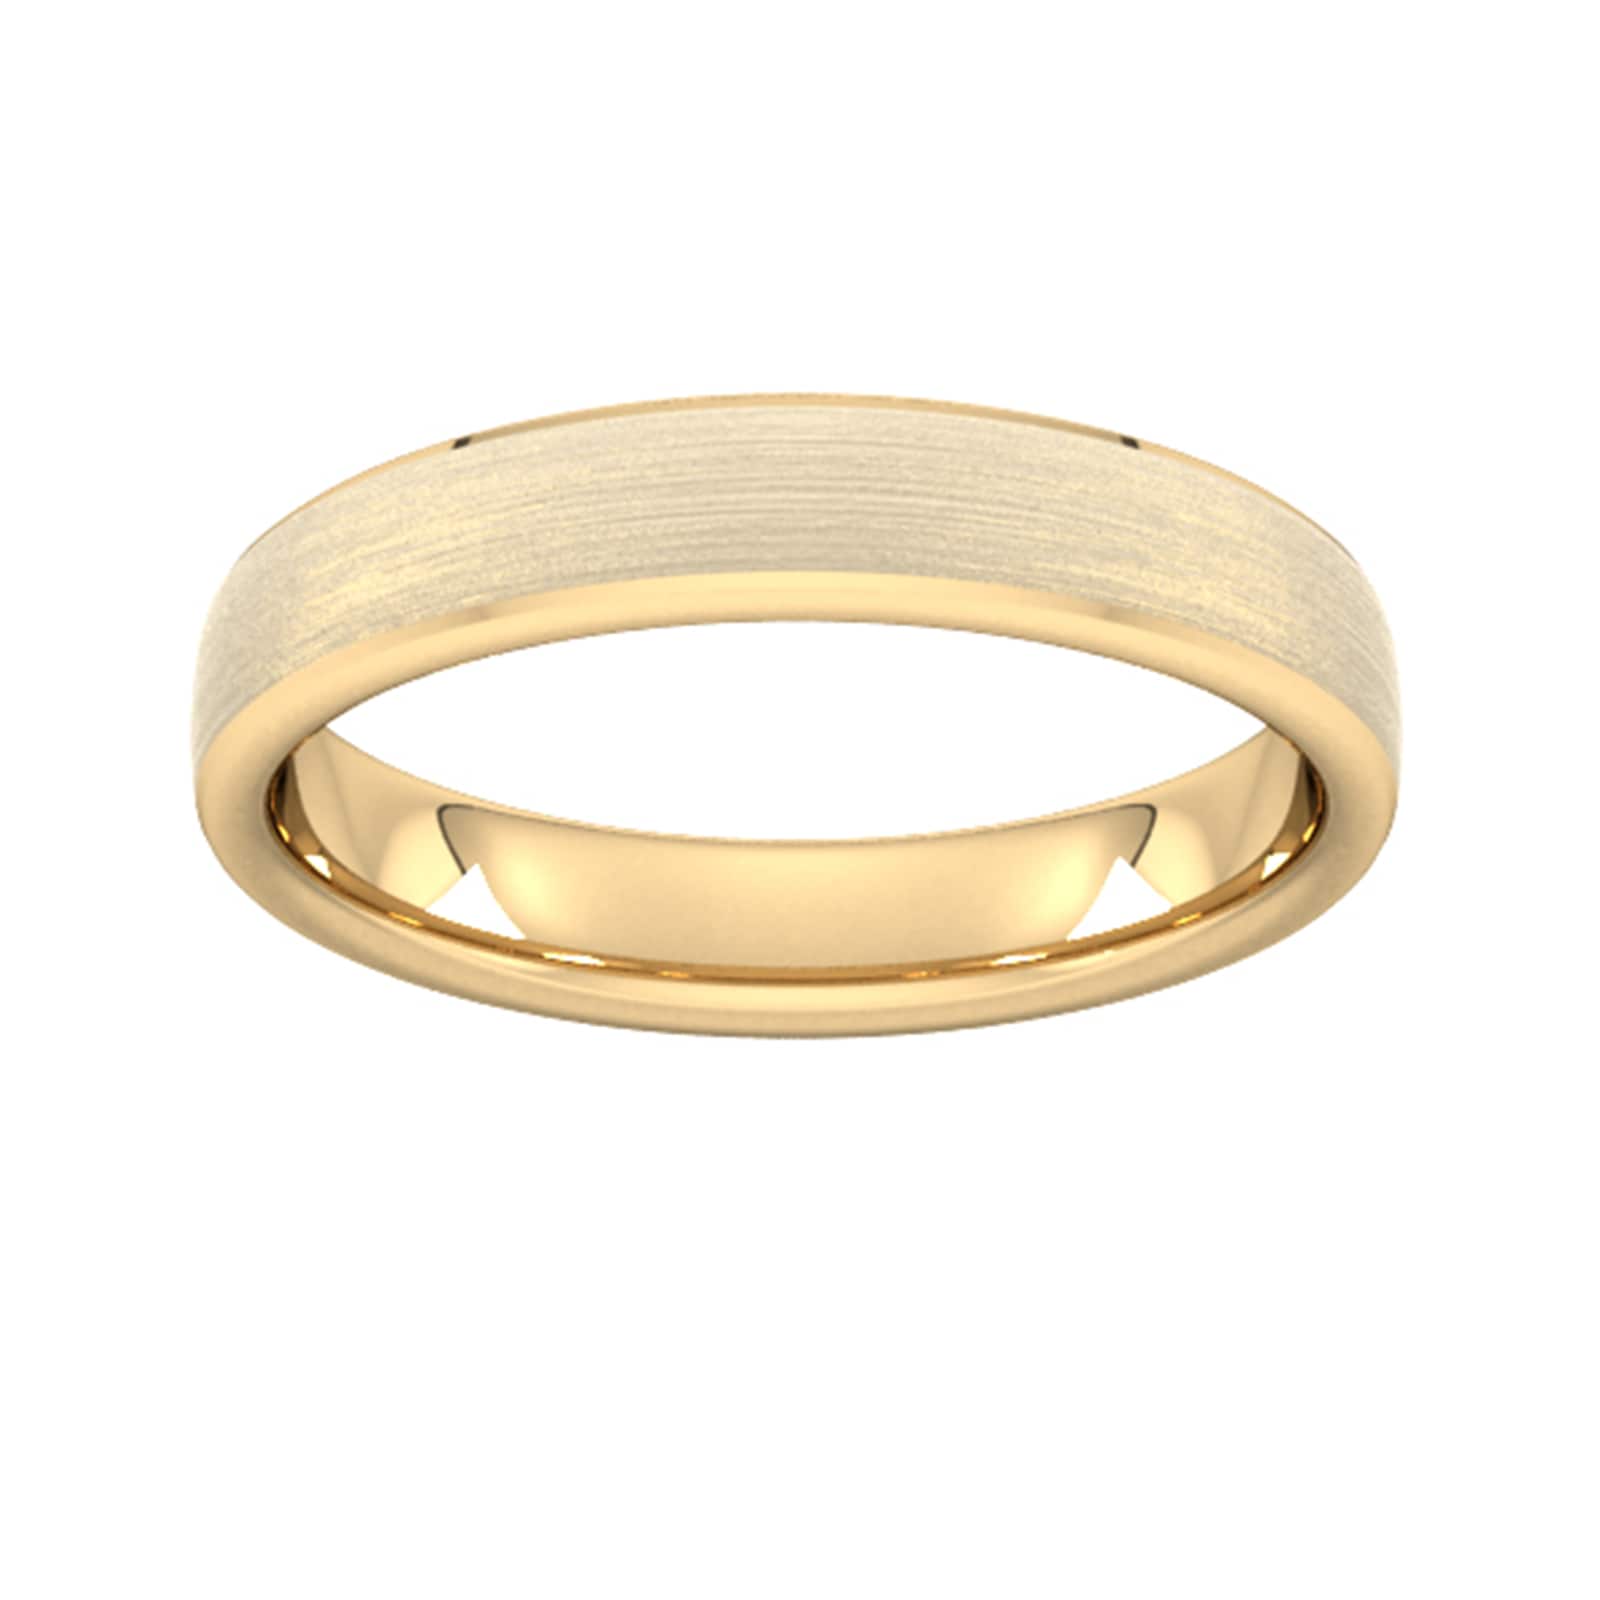 4mm D Shape Heavy Polished Chamfered Edges With Matt Centre Wedding Ring In 18 Carat Yellow Gold - Ring Size I